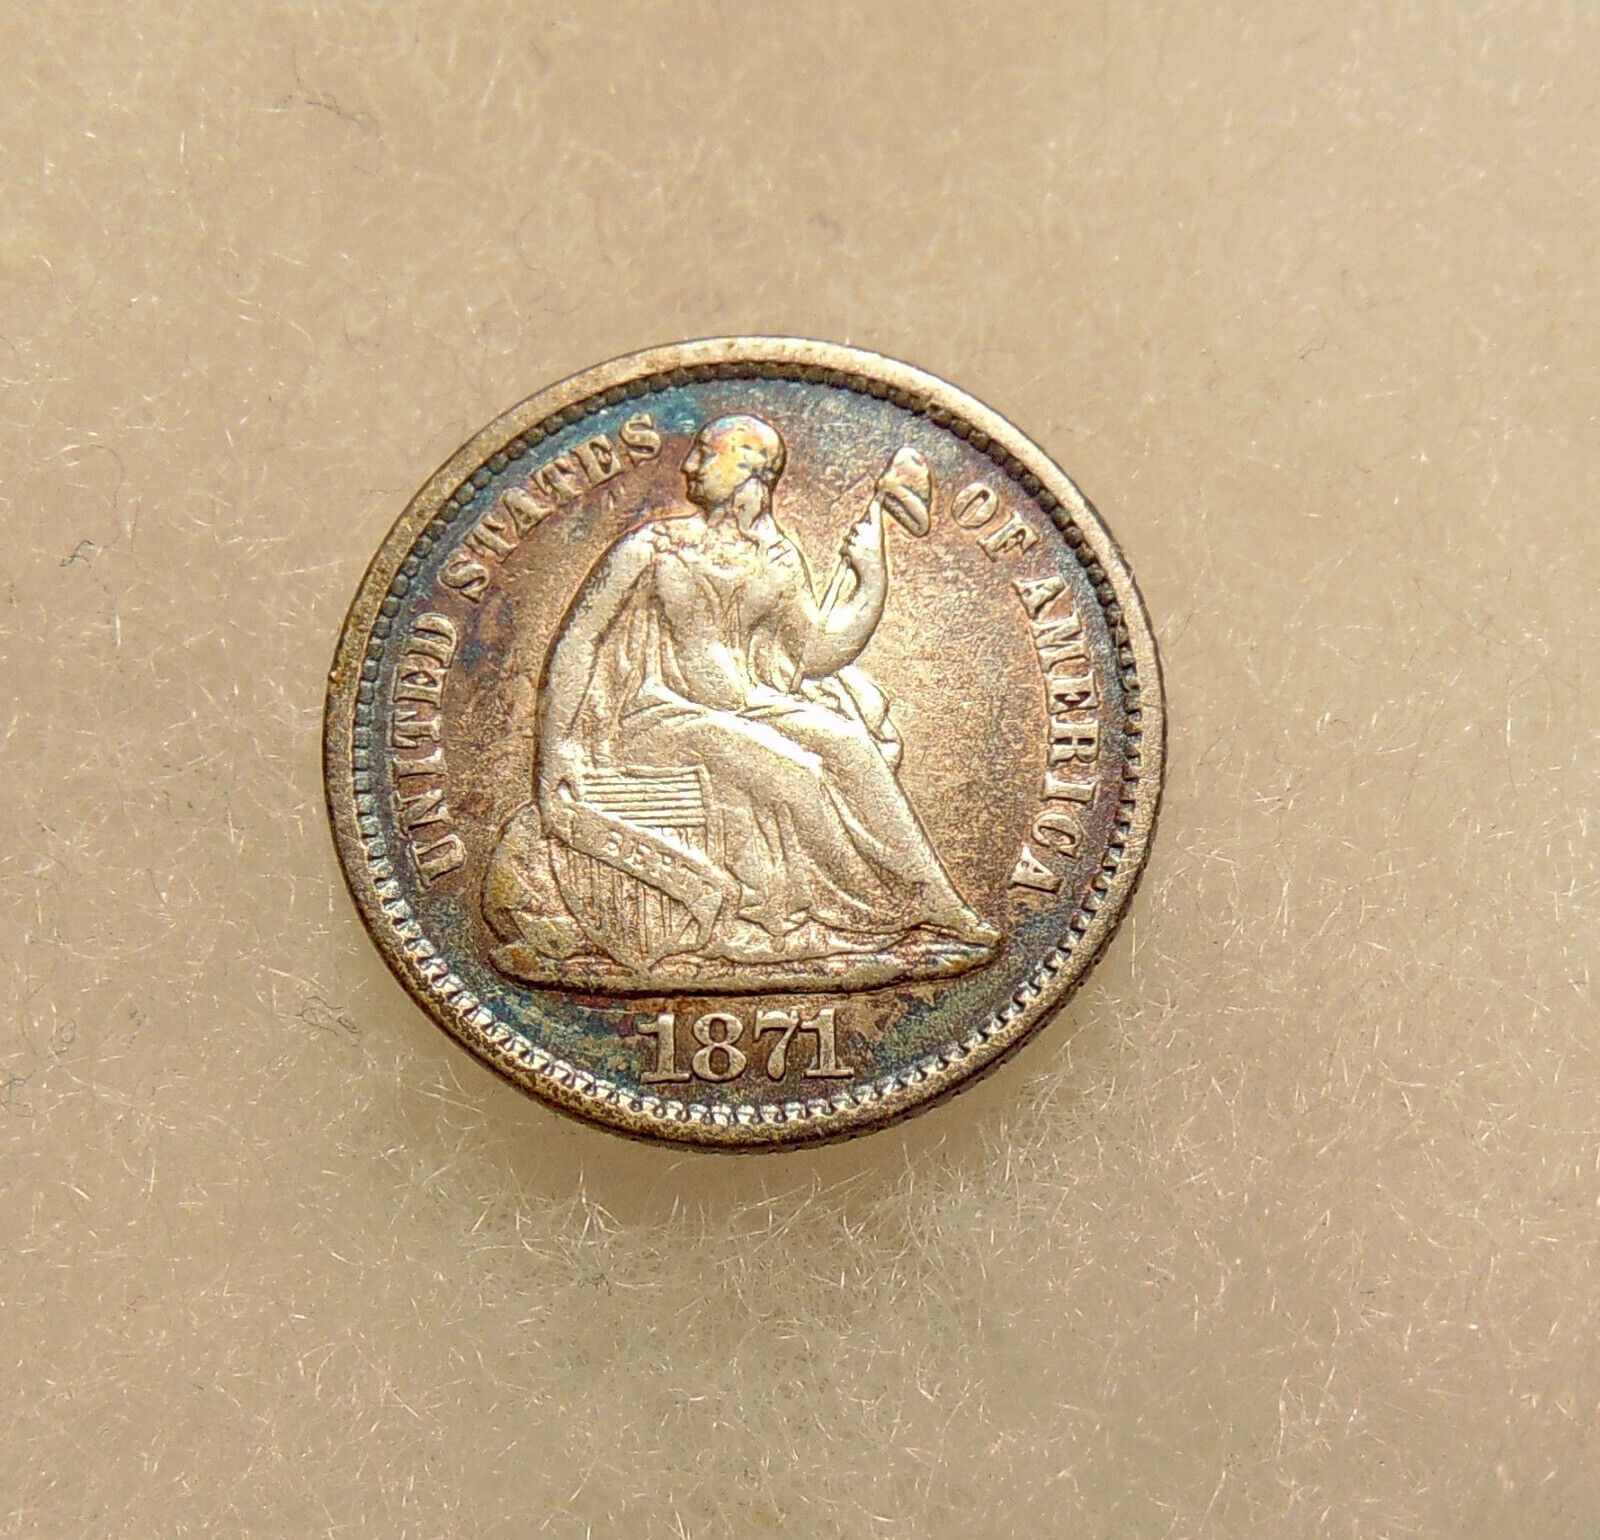 1871 Liberty Seated Half Dime - Better Date - Sharp Looking Coin -free Shipping